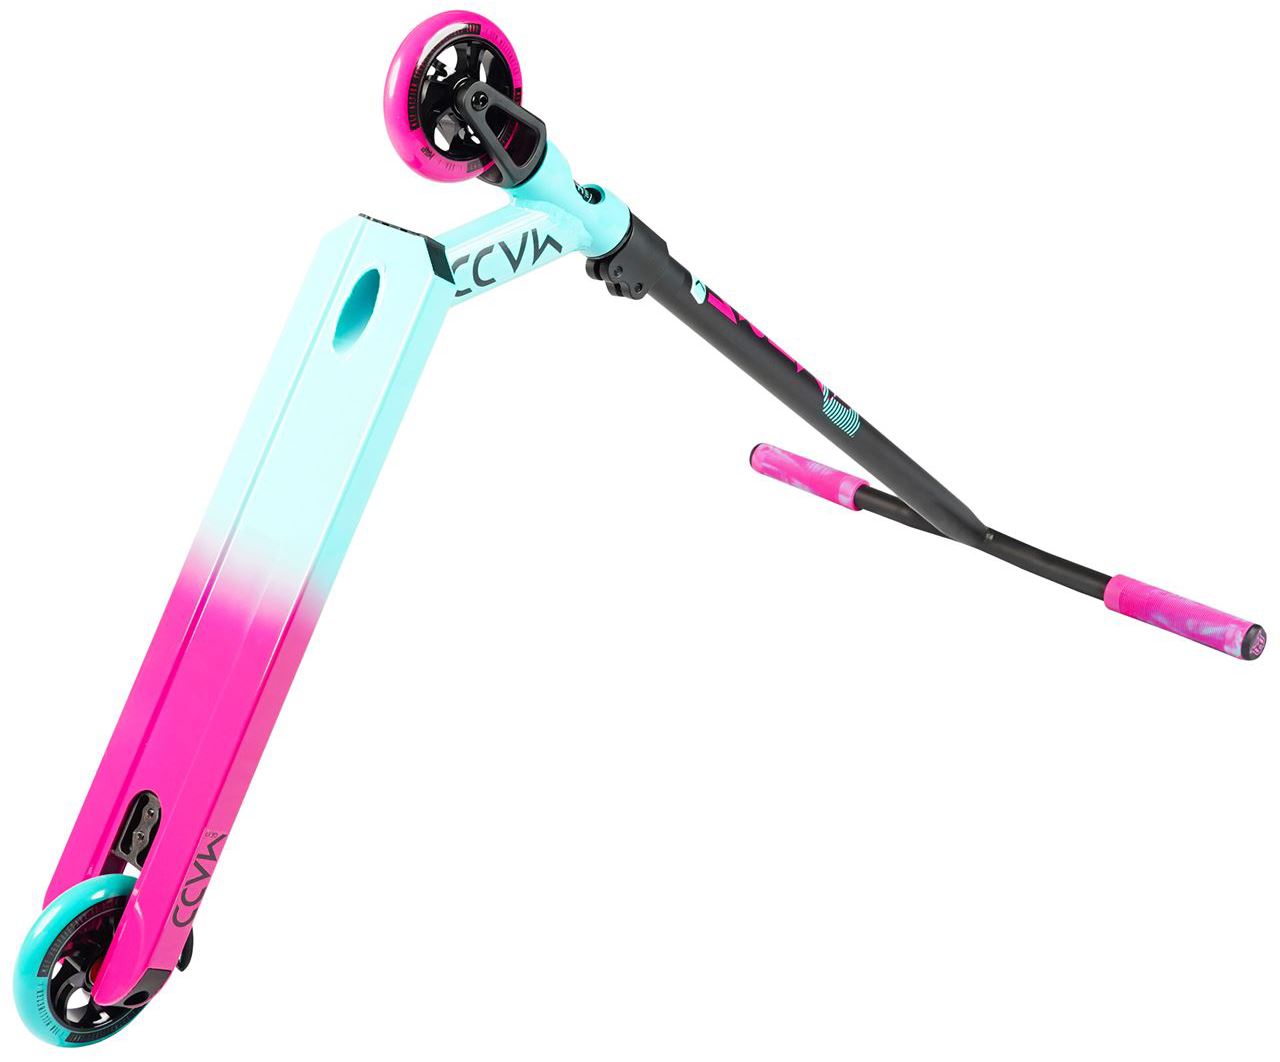 Madd Gear MGP Kick Extreme V5 Complete Stunt Scooter - Teal / Pink - Graphic